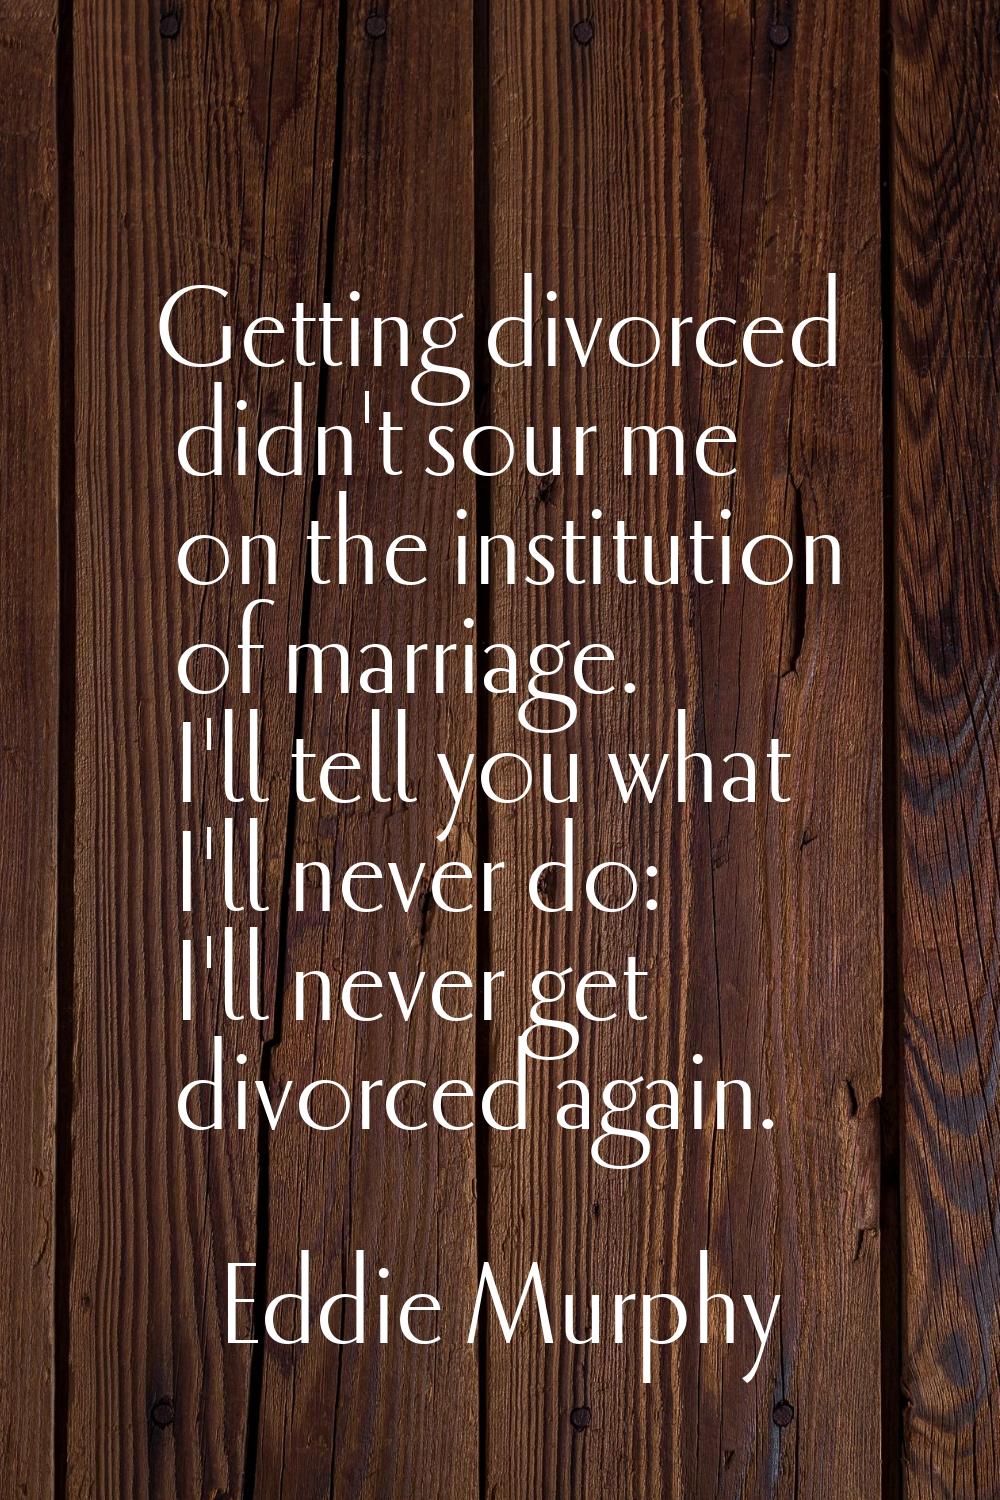 Getting divorced didn't sour me on the institution of marriage. I'll tell you what I'll never do: I